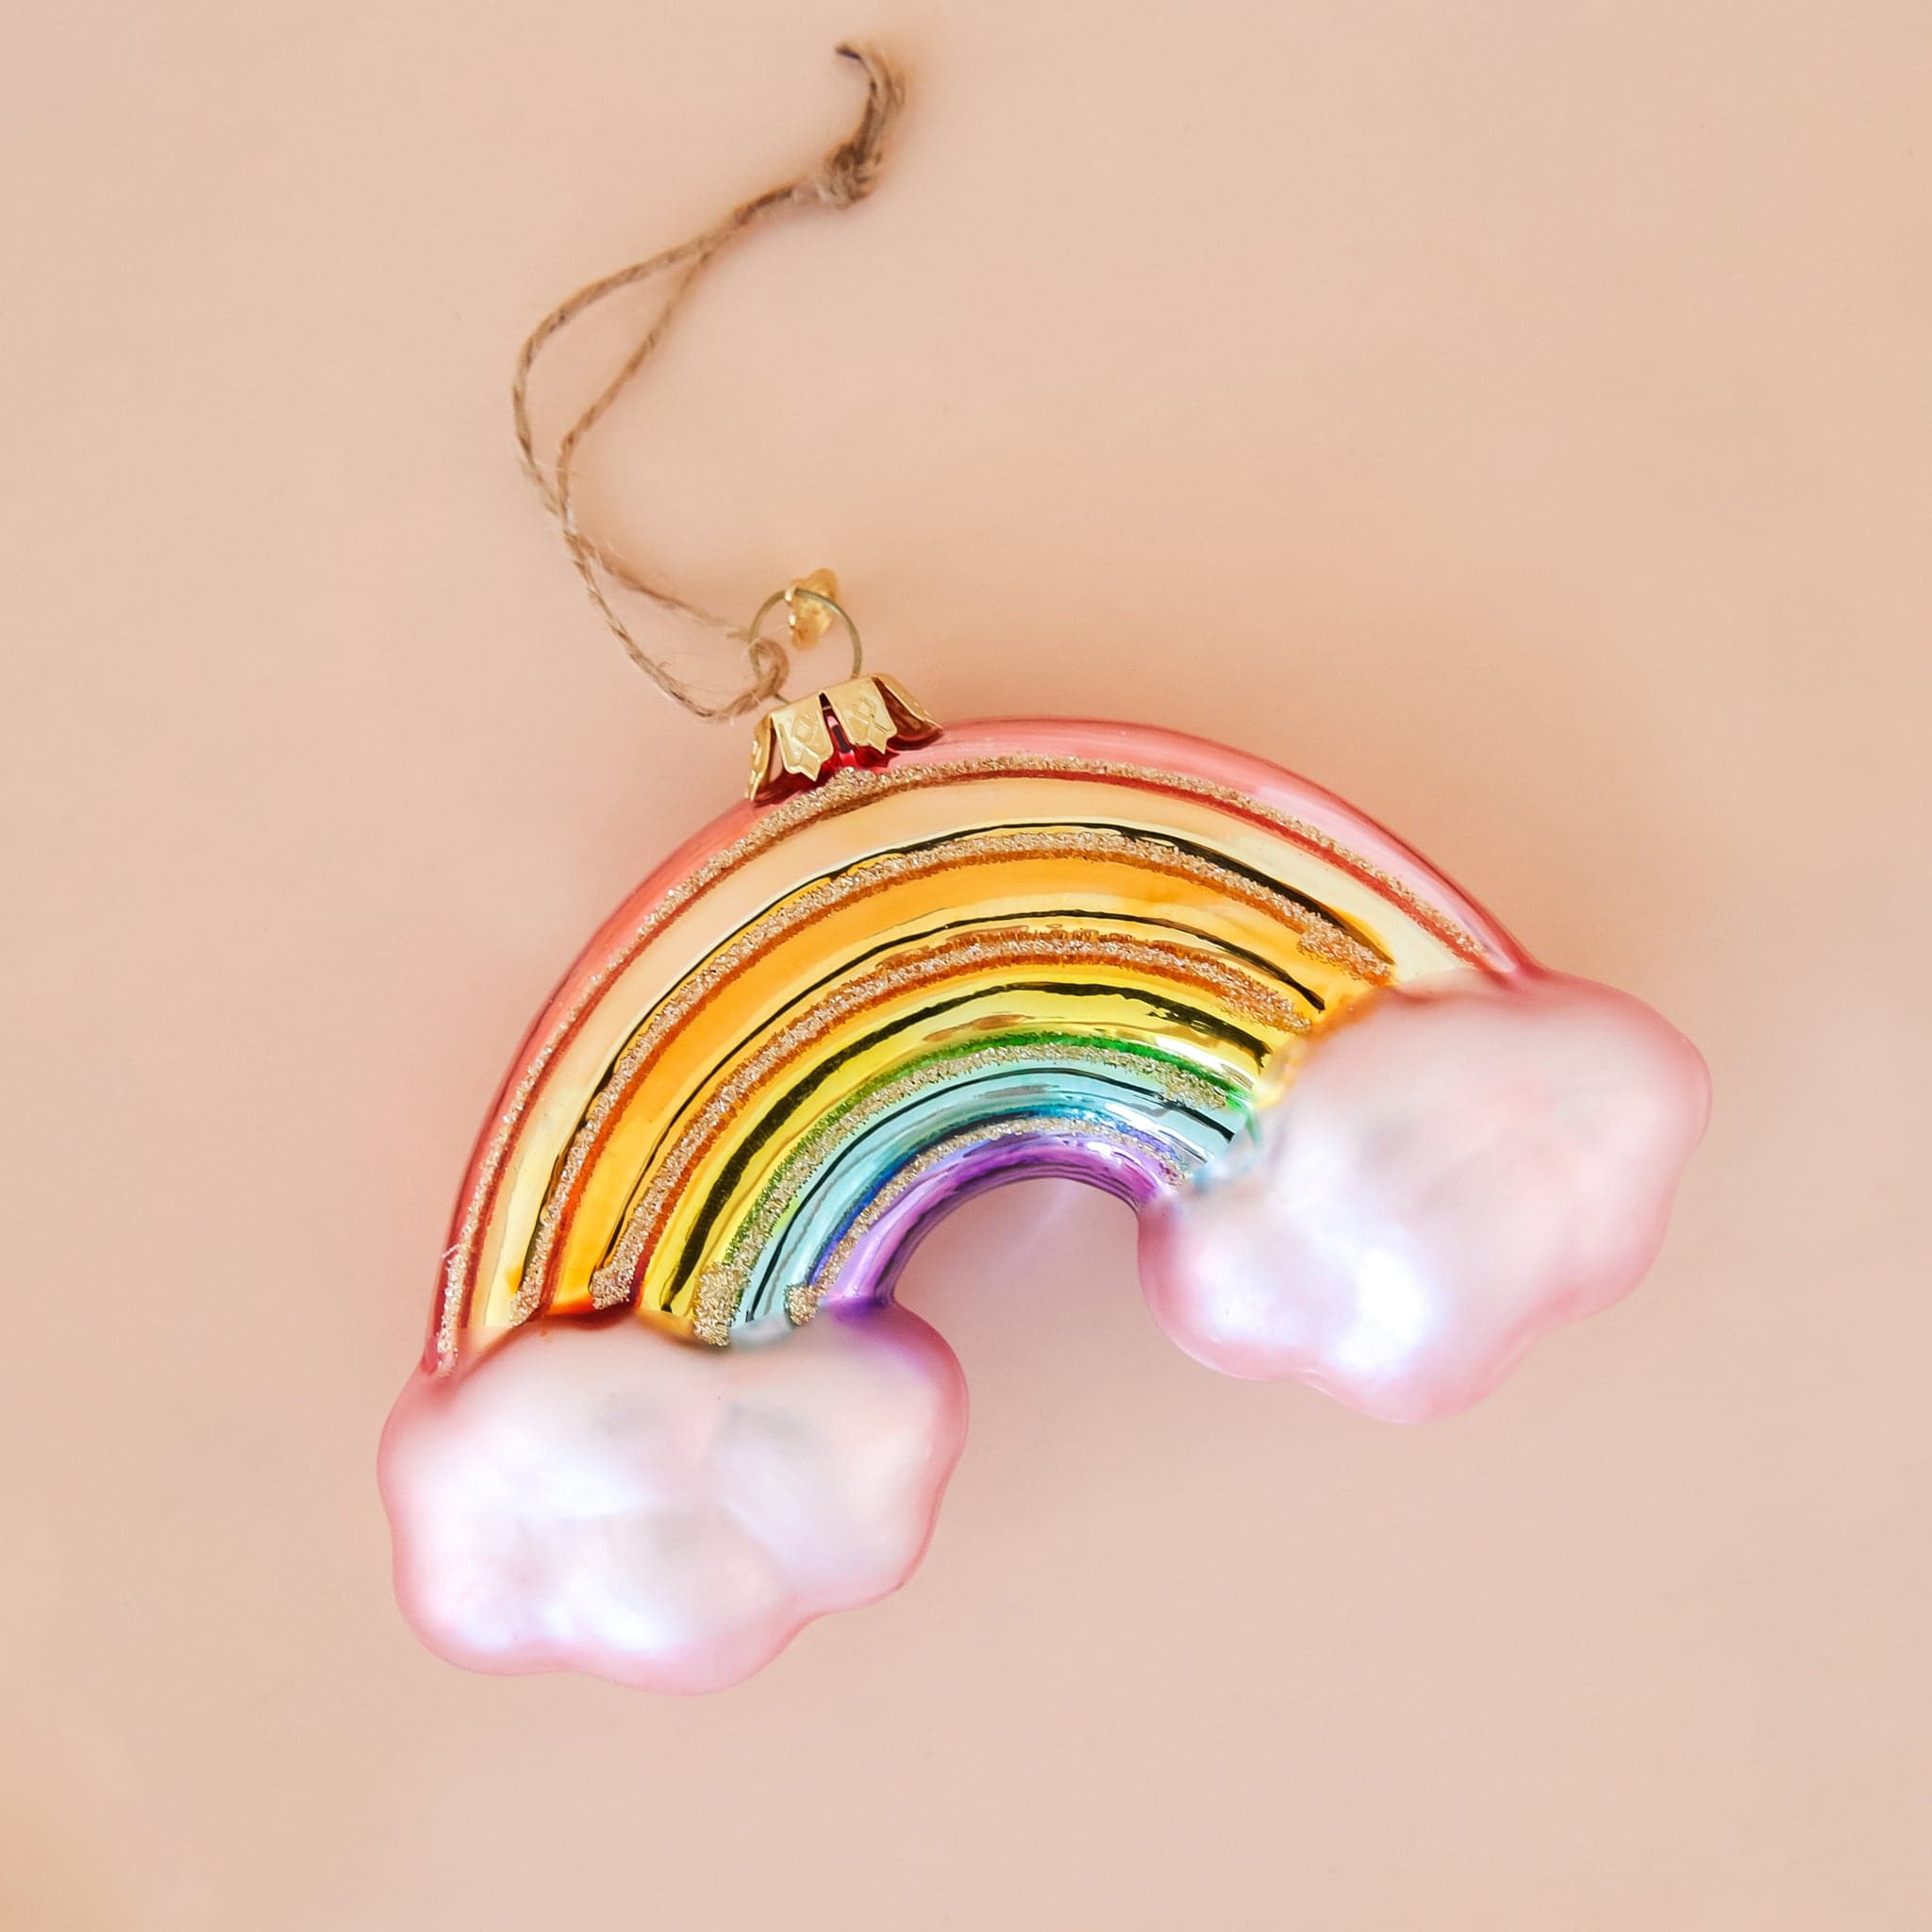 In front of a peachy background is a glass rainbow ornament. There is a light pink cloud on each end of the rainbow. The colors of the rainbow are red, orange, yellow, green, blue and purple. There is gold glitter in between each color. At the top of the ornament is a gold hook with brown twine string. 